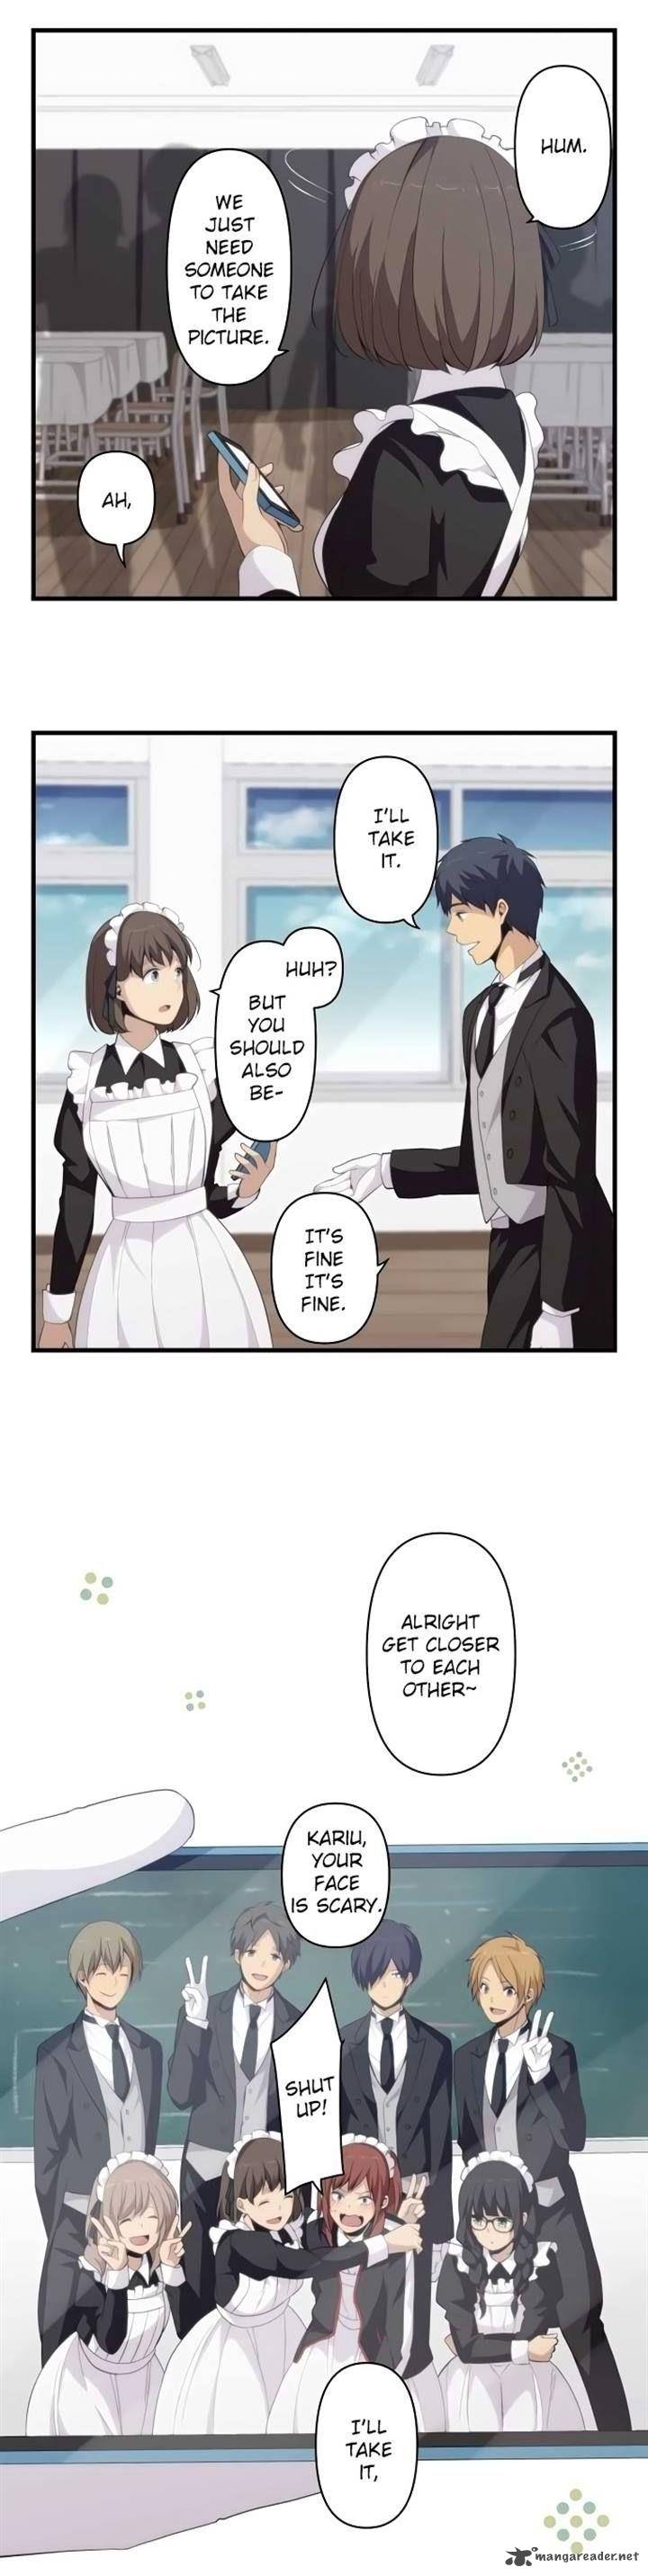 Relife 144 5